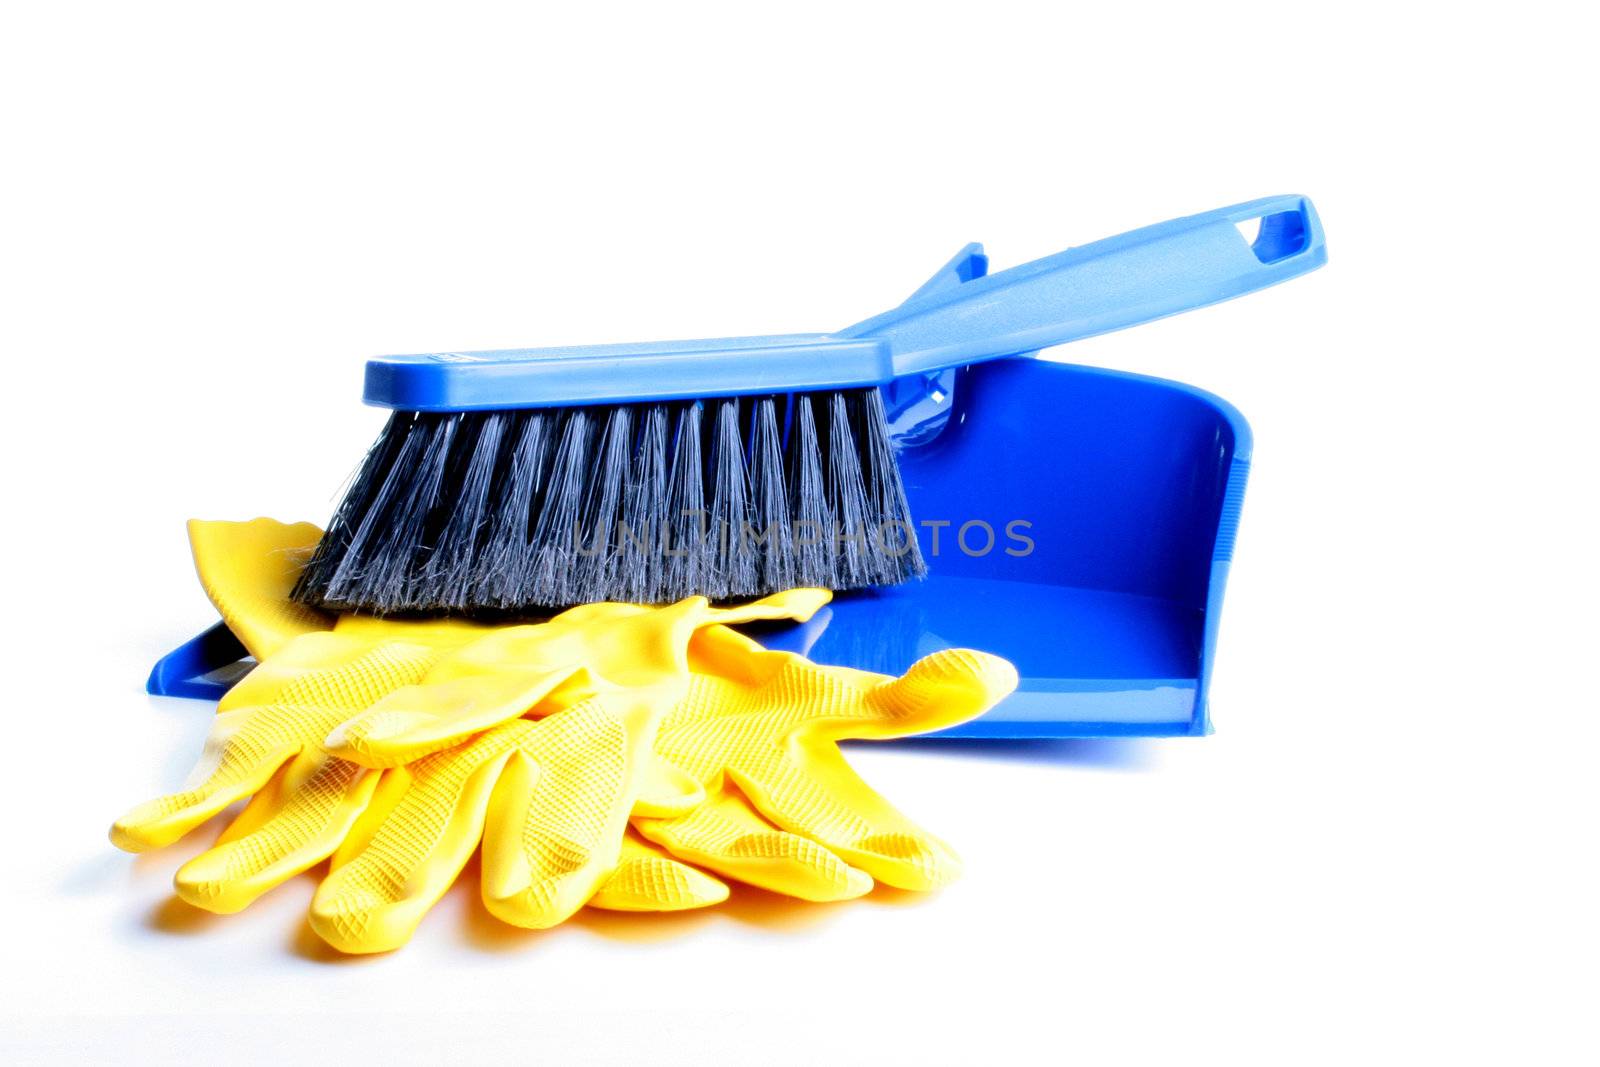 Dust-pan and brush of dark blue colour with a black bristle for dust cleaning and yellow rubber gloves on a white background.